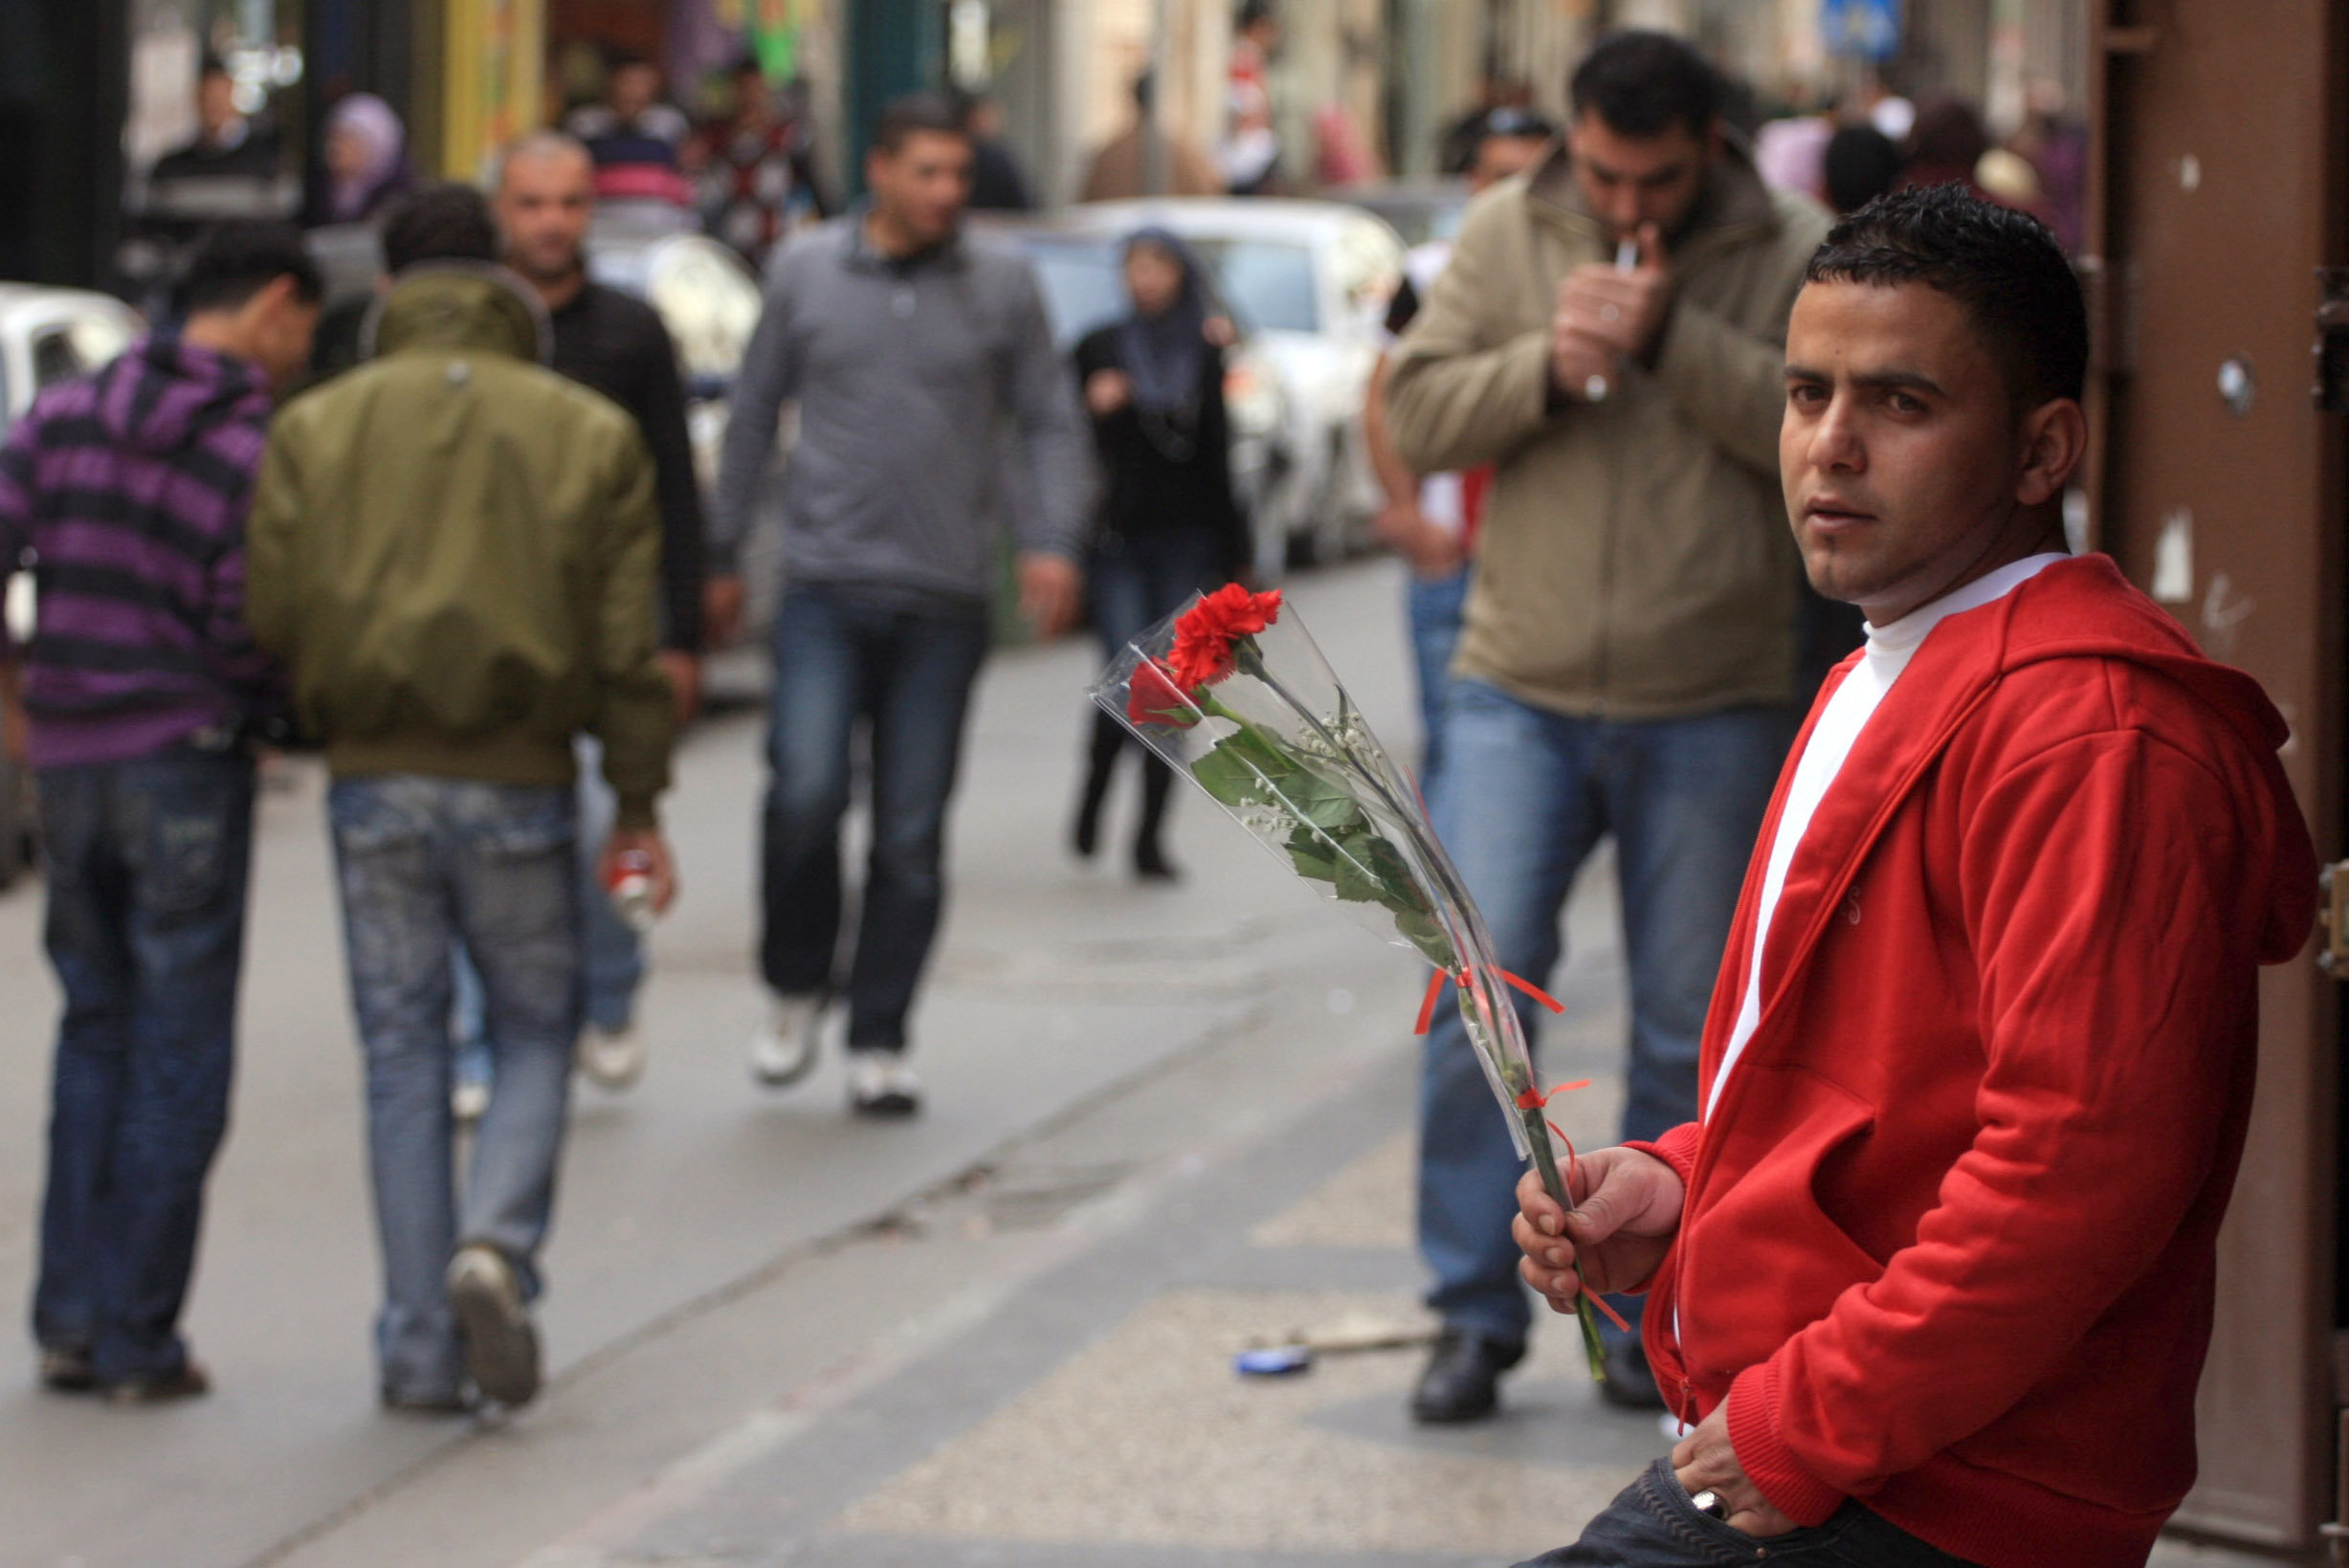 Illustrative: A Palestinian man sells roses on Valentine’s Day in the West Bank city of Ramallah, February 14, 2010. (Issam Rimawi/Flash90)